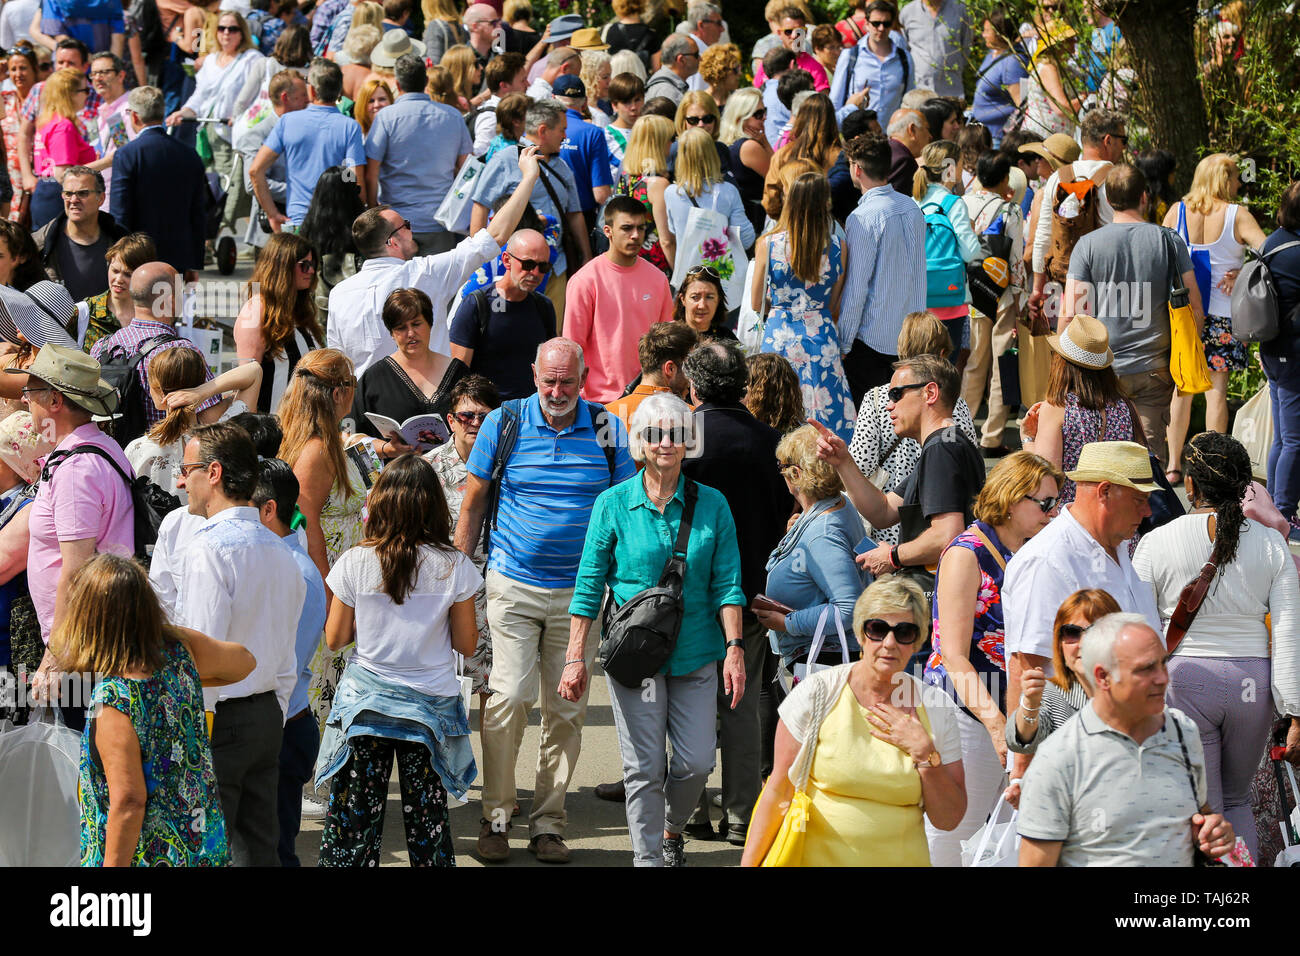 Chelsea Flower Show. West London, UK 25 May 2019 - Large crowd at the final day of the show. The Royal Horticultural Society Chelsea Flower Show is an annual garden show held in the grounds of the Royal Hospital Chelsea in West London since 1913he Royal Hospital Chelsea in West London since 1913.  Credit: Dinendra Haria/Alamy Live News Credit: Dinendra Haria/Alamy Live News Stock Photo